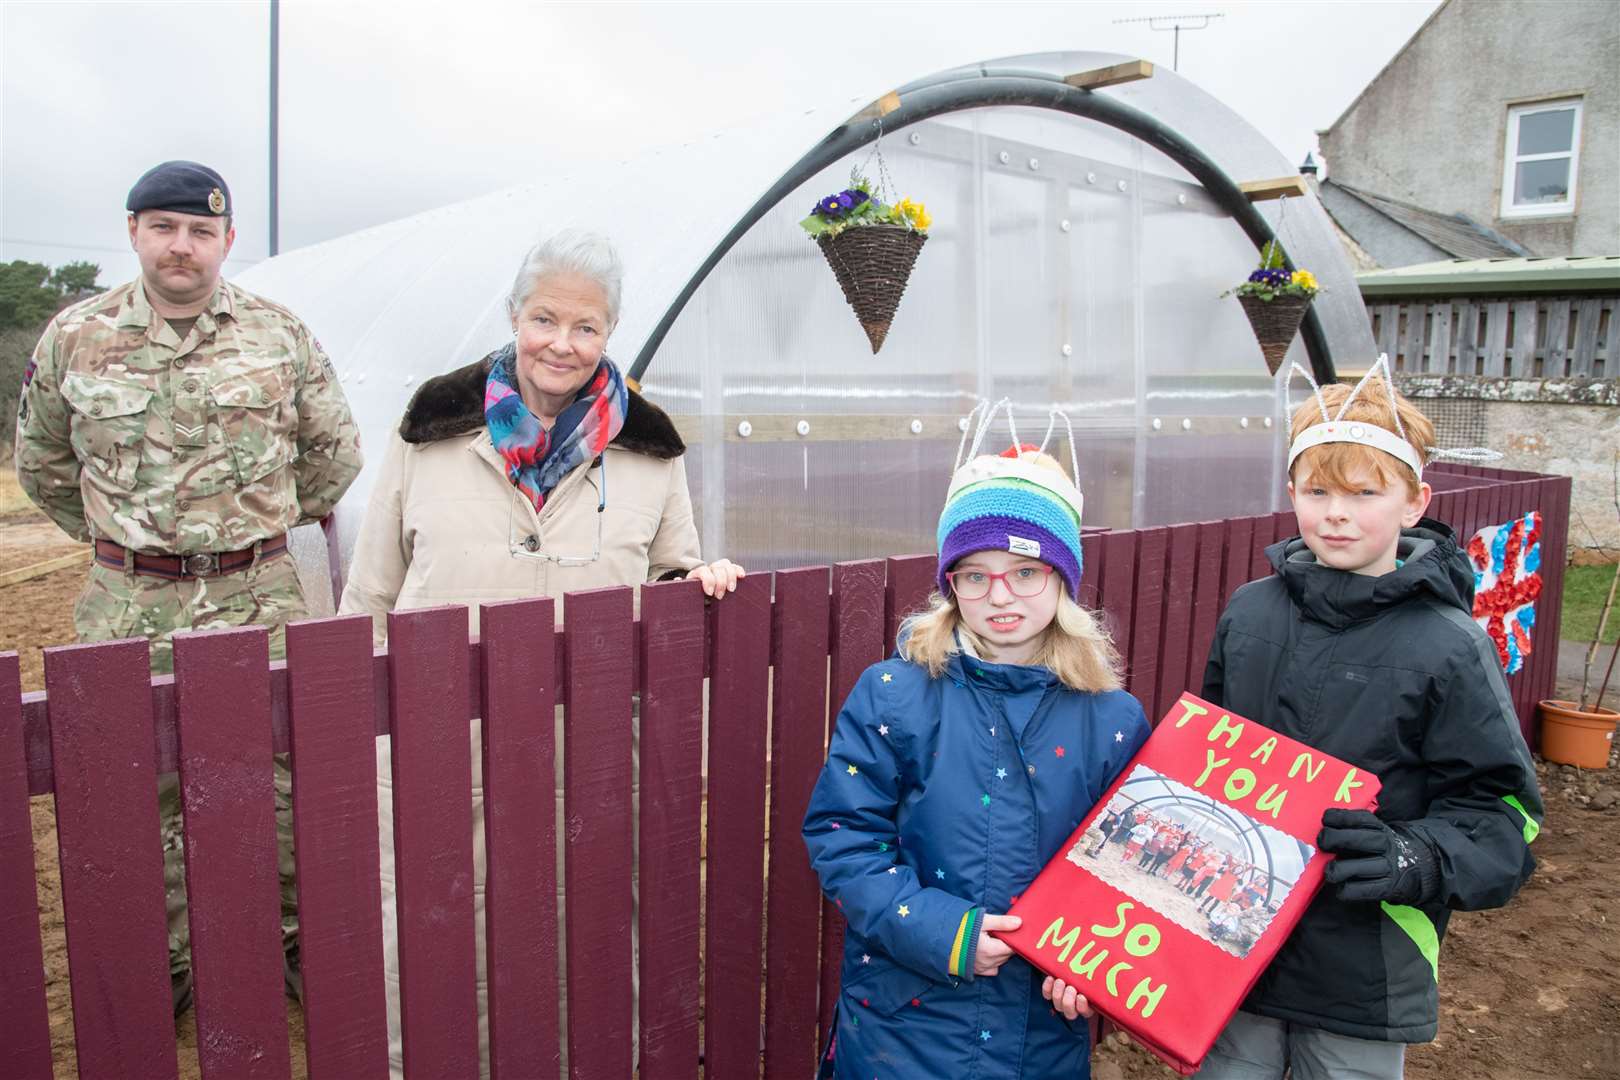 Pupils Aila Gibson and William Grant thanking Poppy Houldsworth and Cpl Robert Grant for their help. Picture: Daniel Forsyth